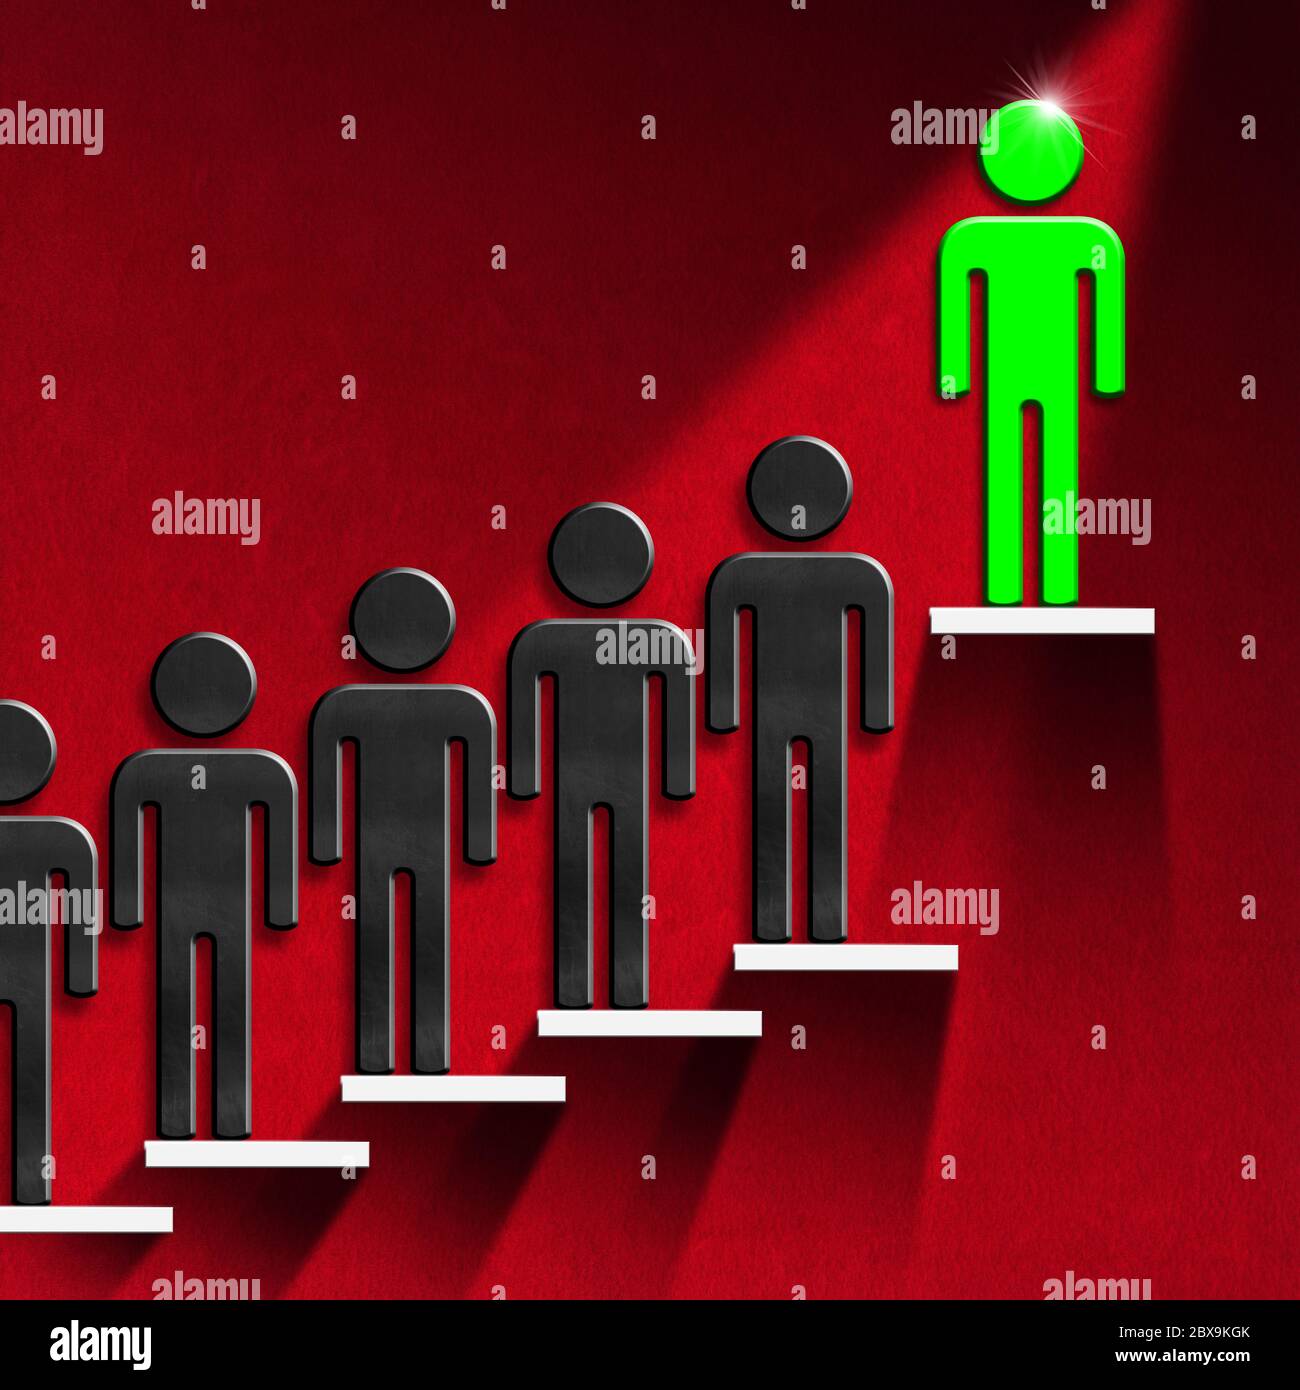 3D illustration of black human figures, the highest green, on a staircase with white steps and red wall. Leadership and success concept Stock Photo